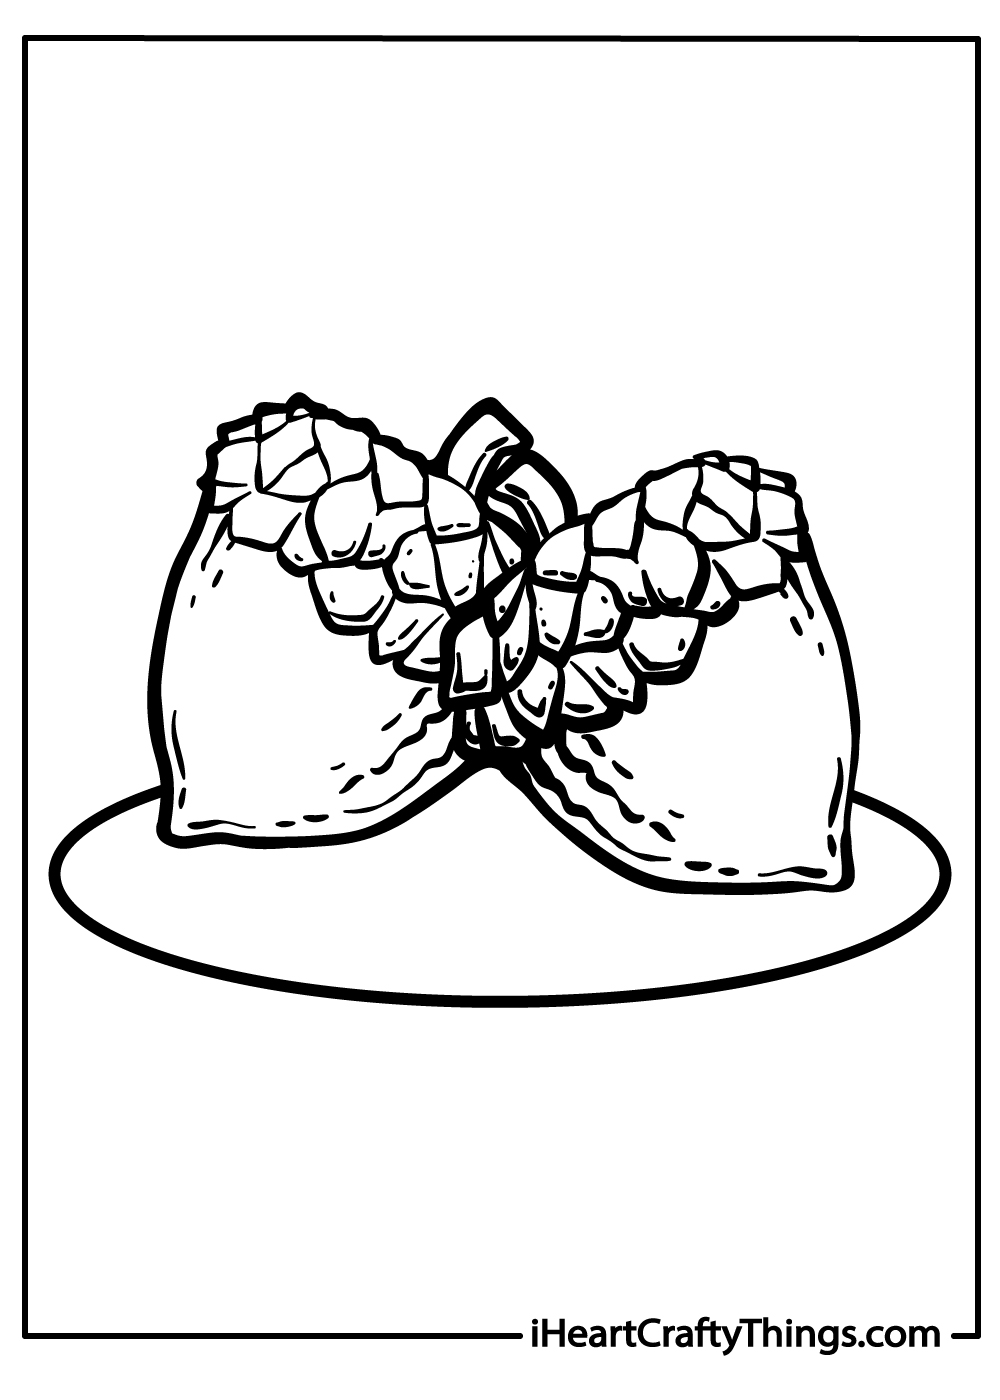 Acorn Coloring Pages free download